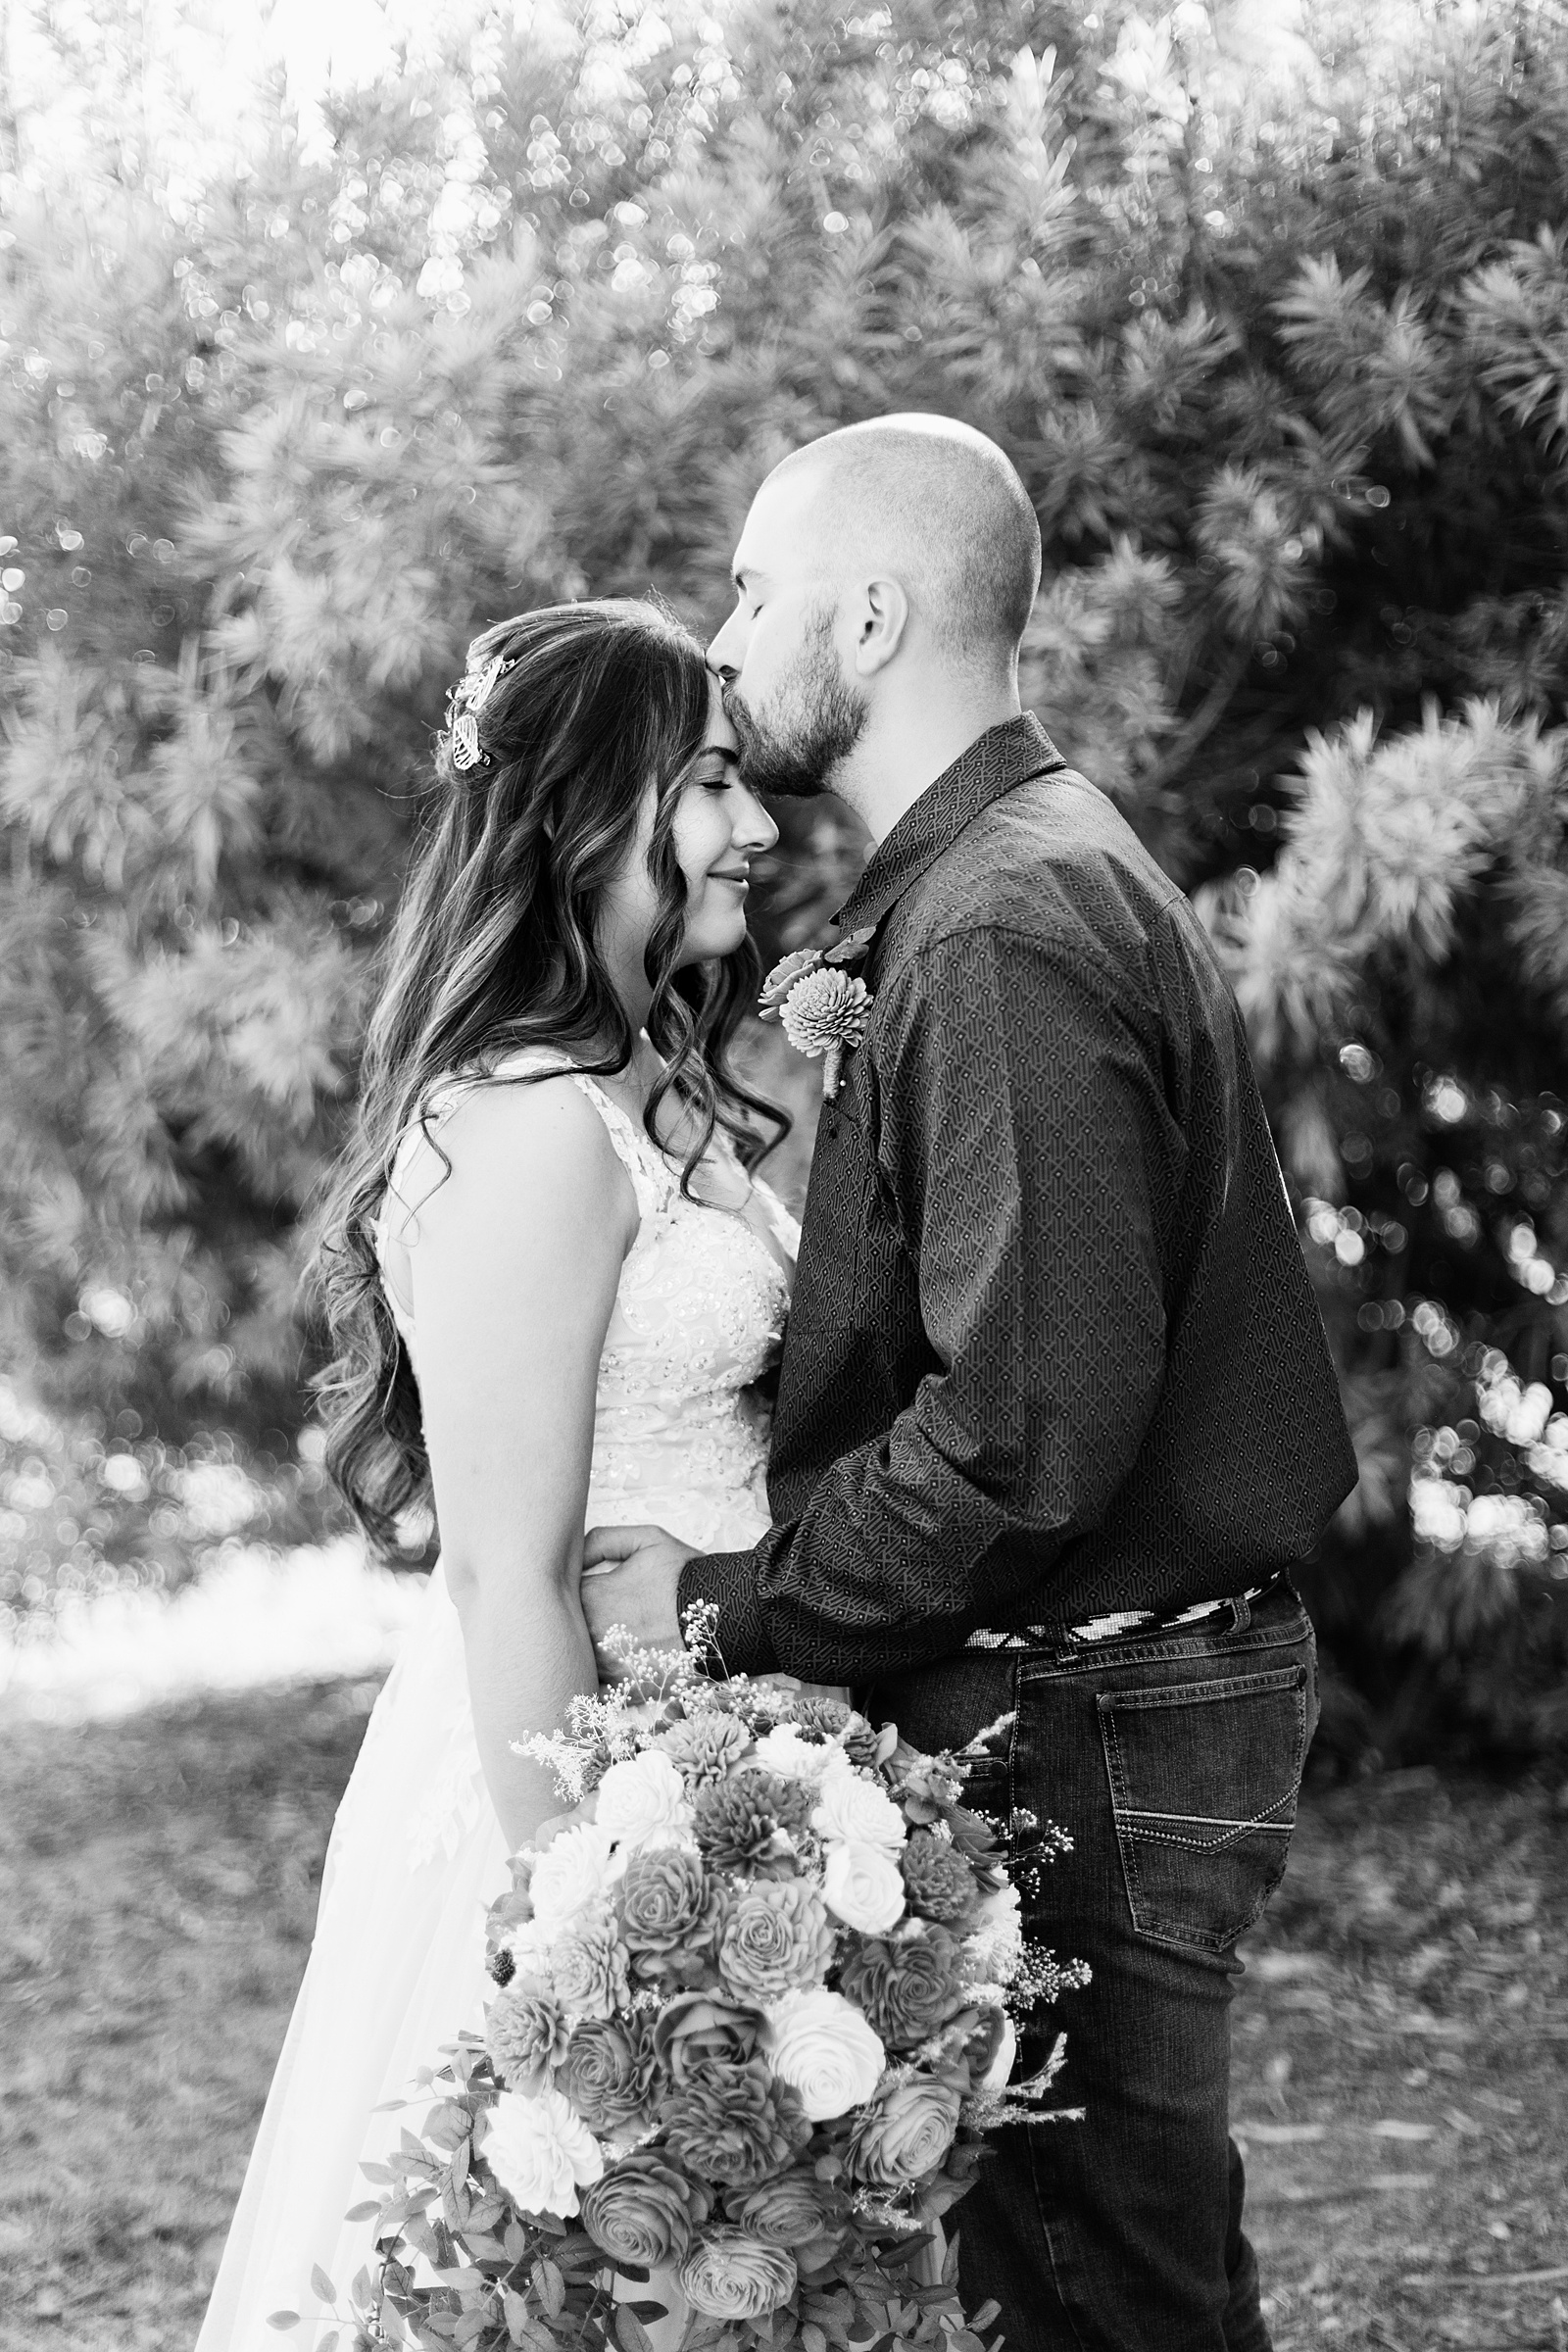 Bride & Groom share an intimate moment at their intimate backyard wedding by Arizona wedding photographer Juniper and Co Photography.